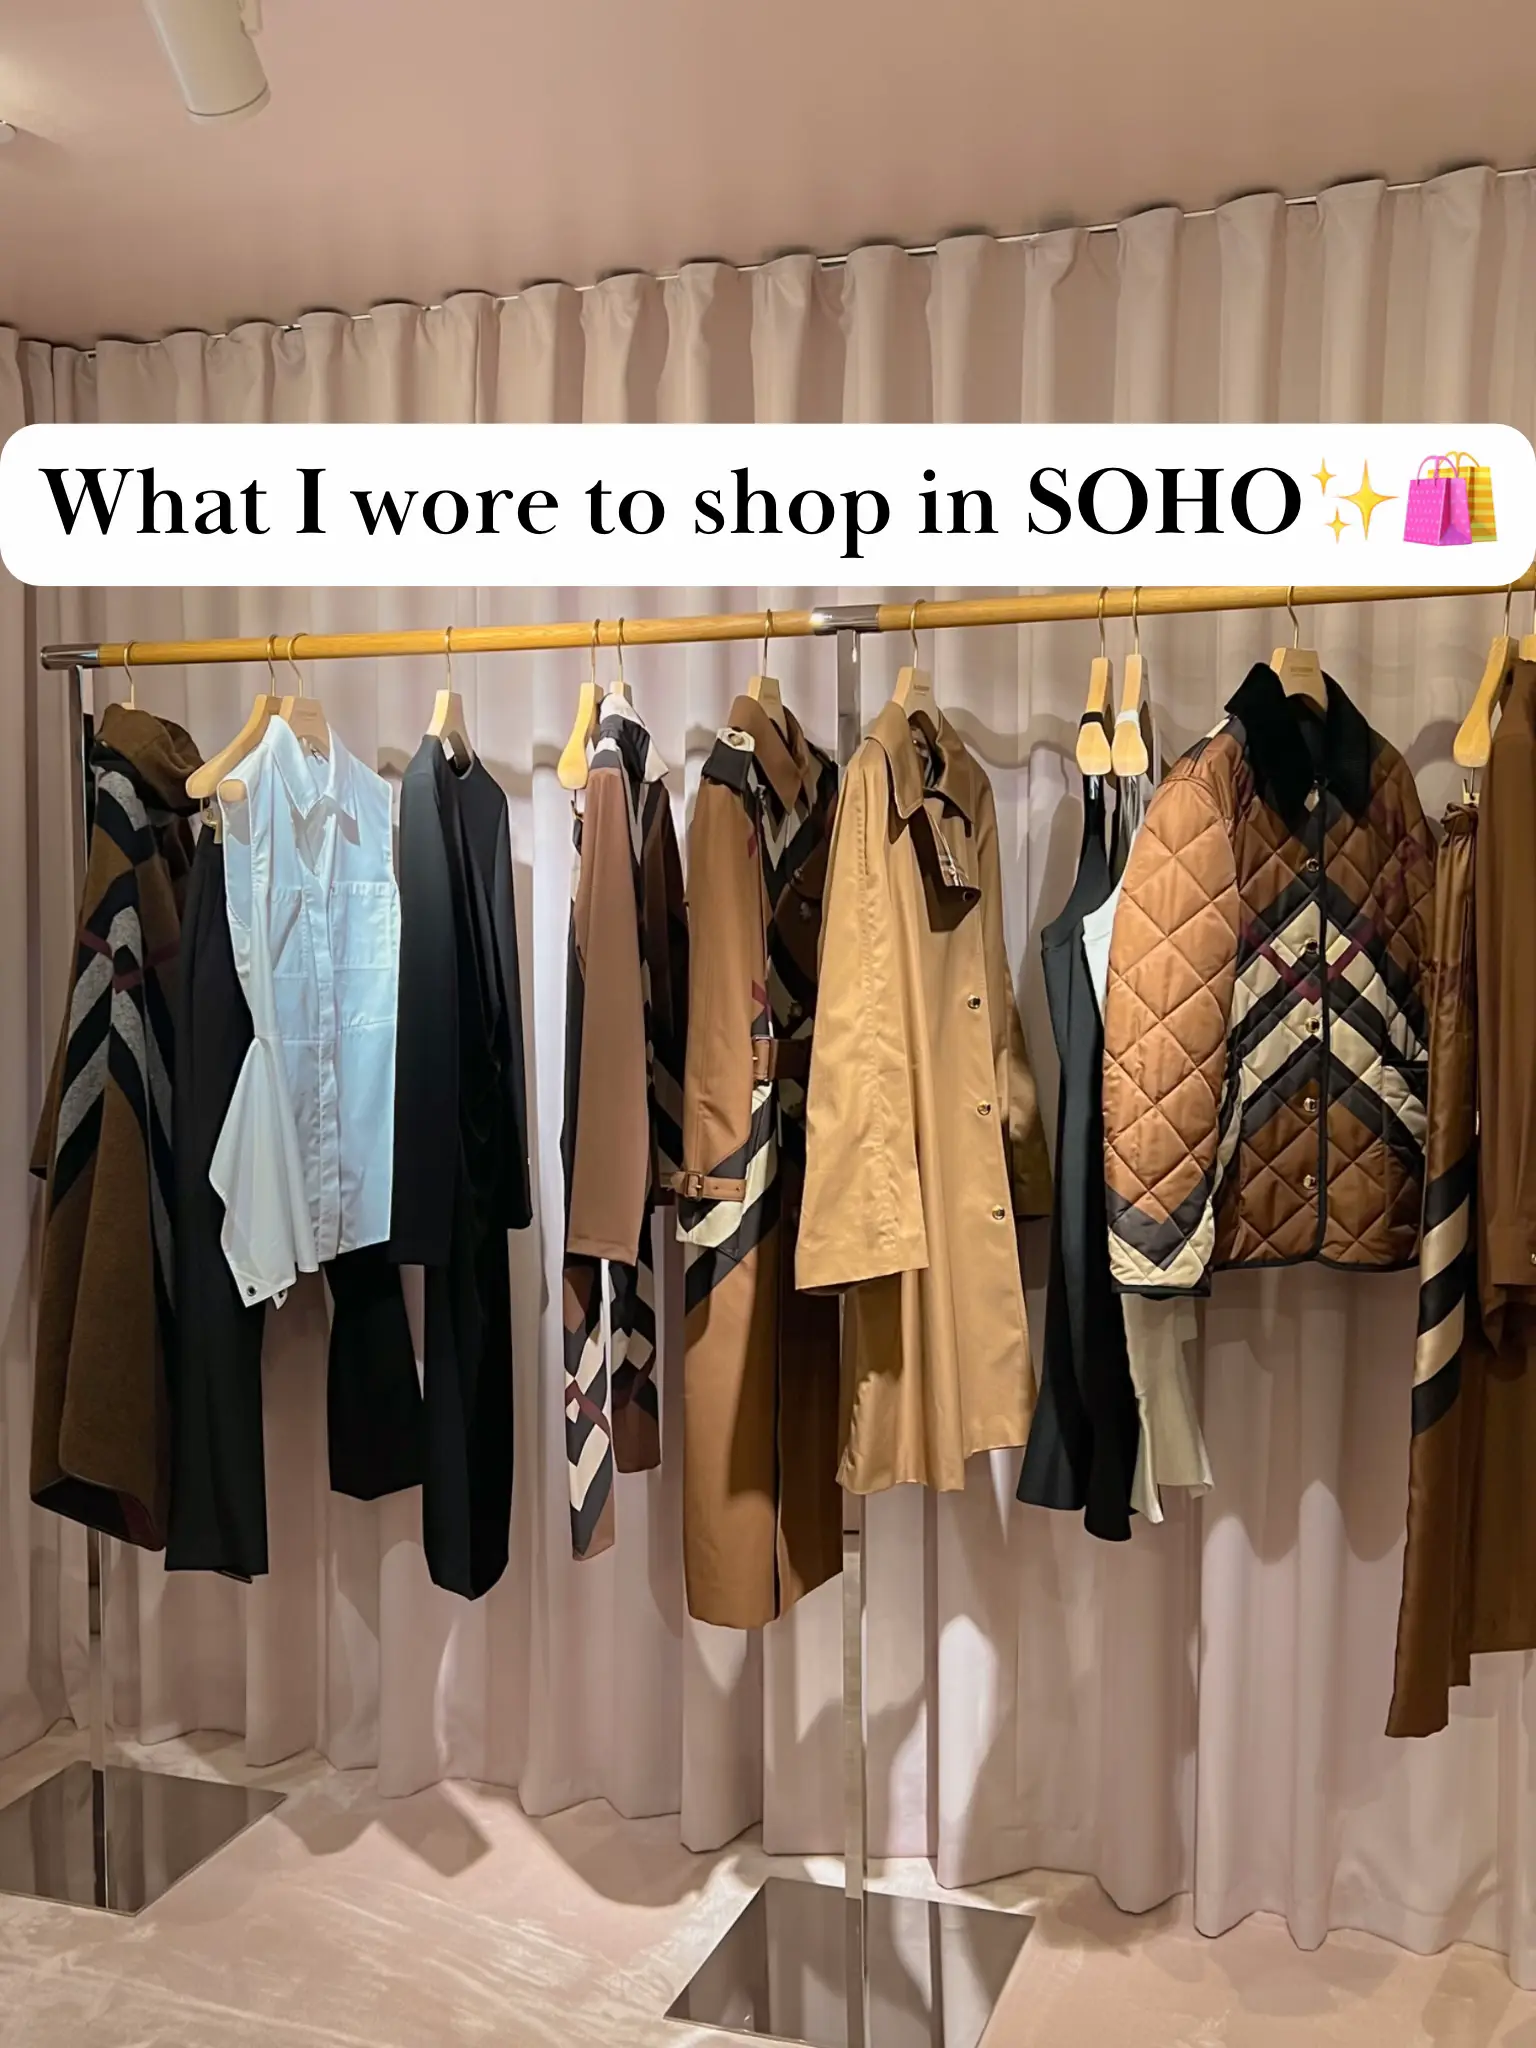 Soho Days / Outfit Ideas, Gallery posted by Tako Adamia